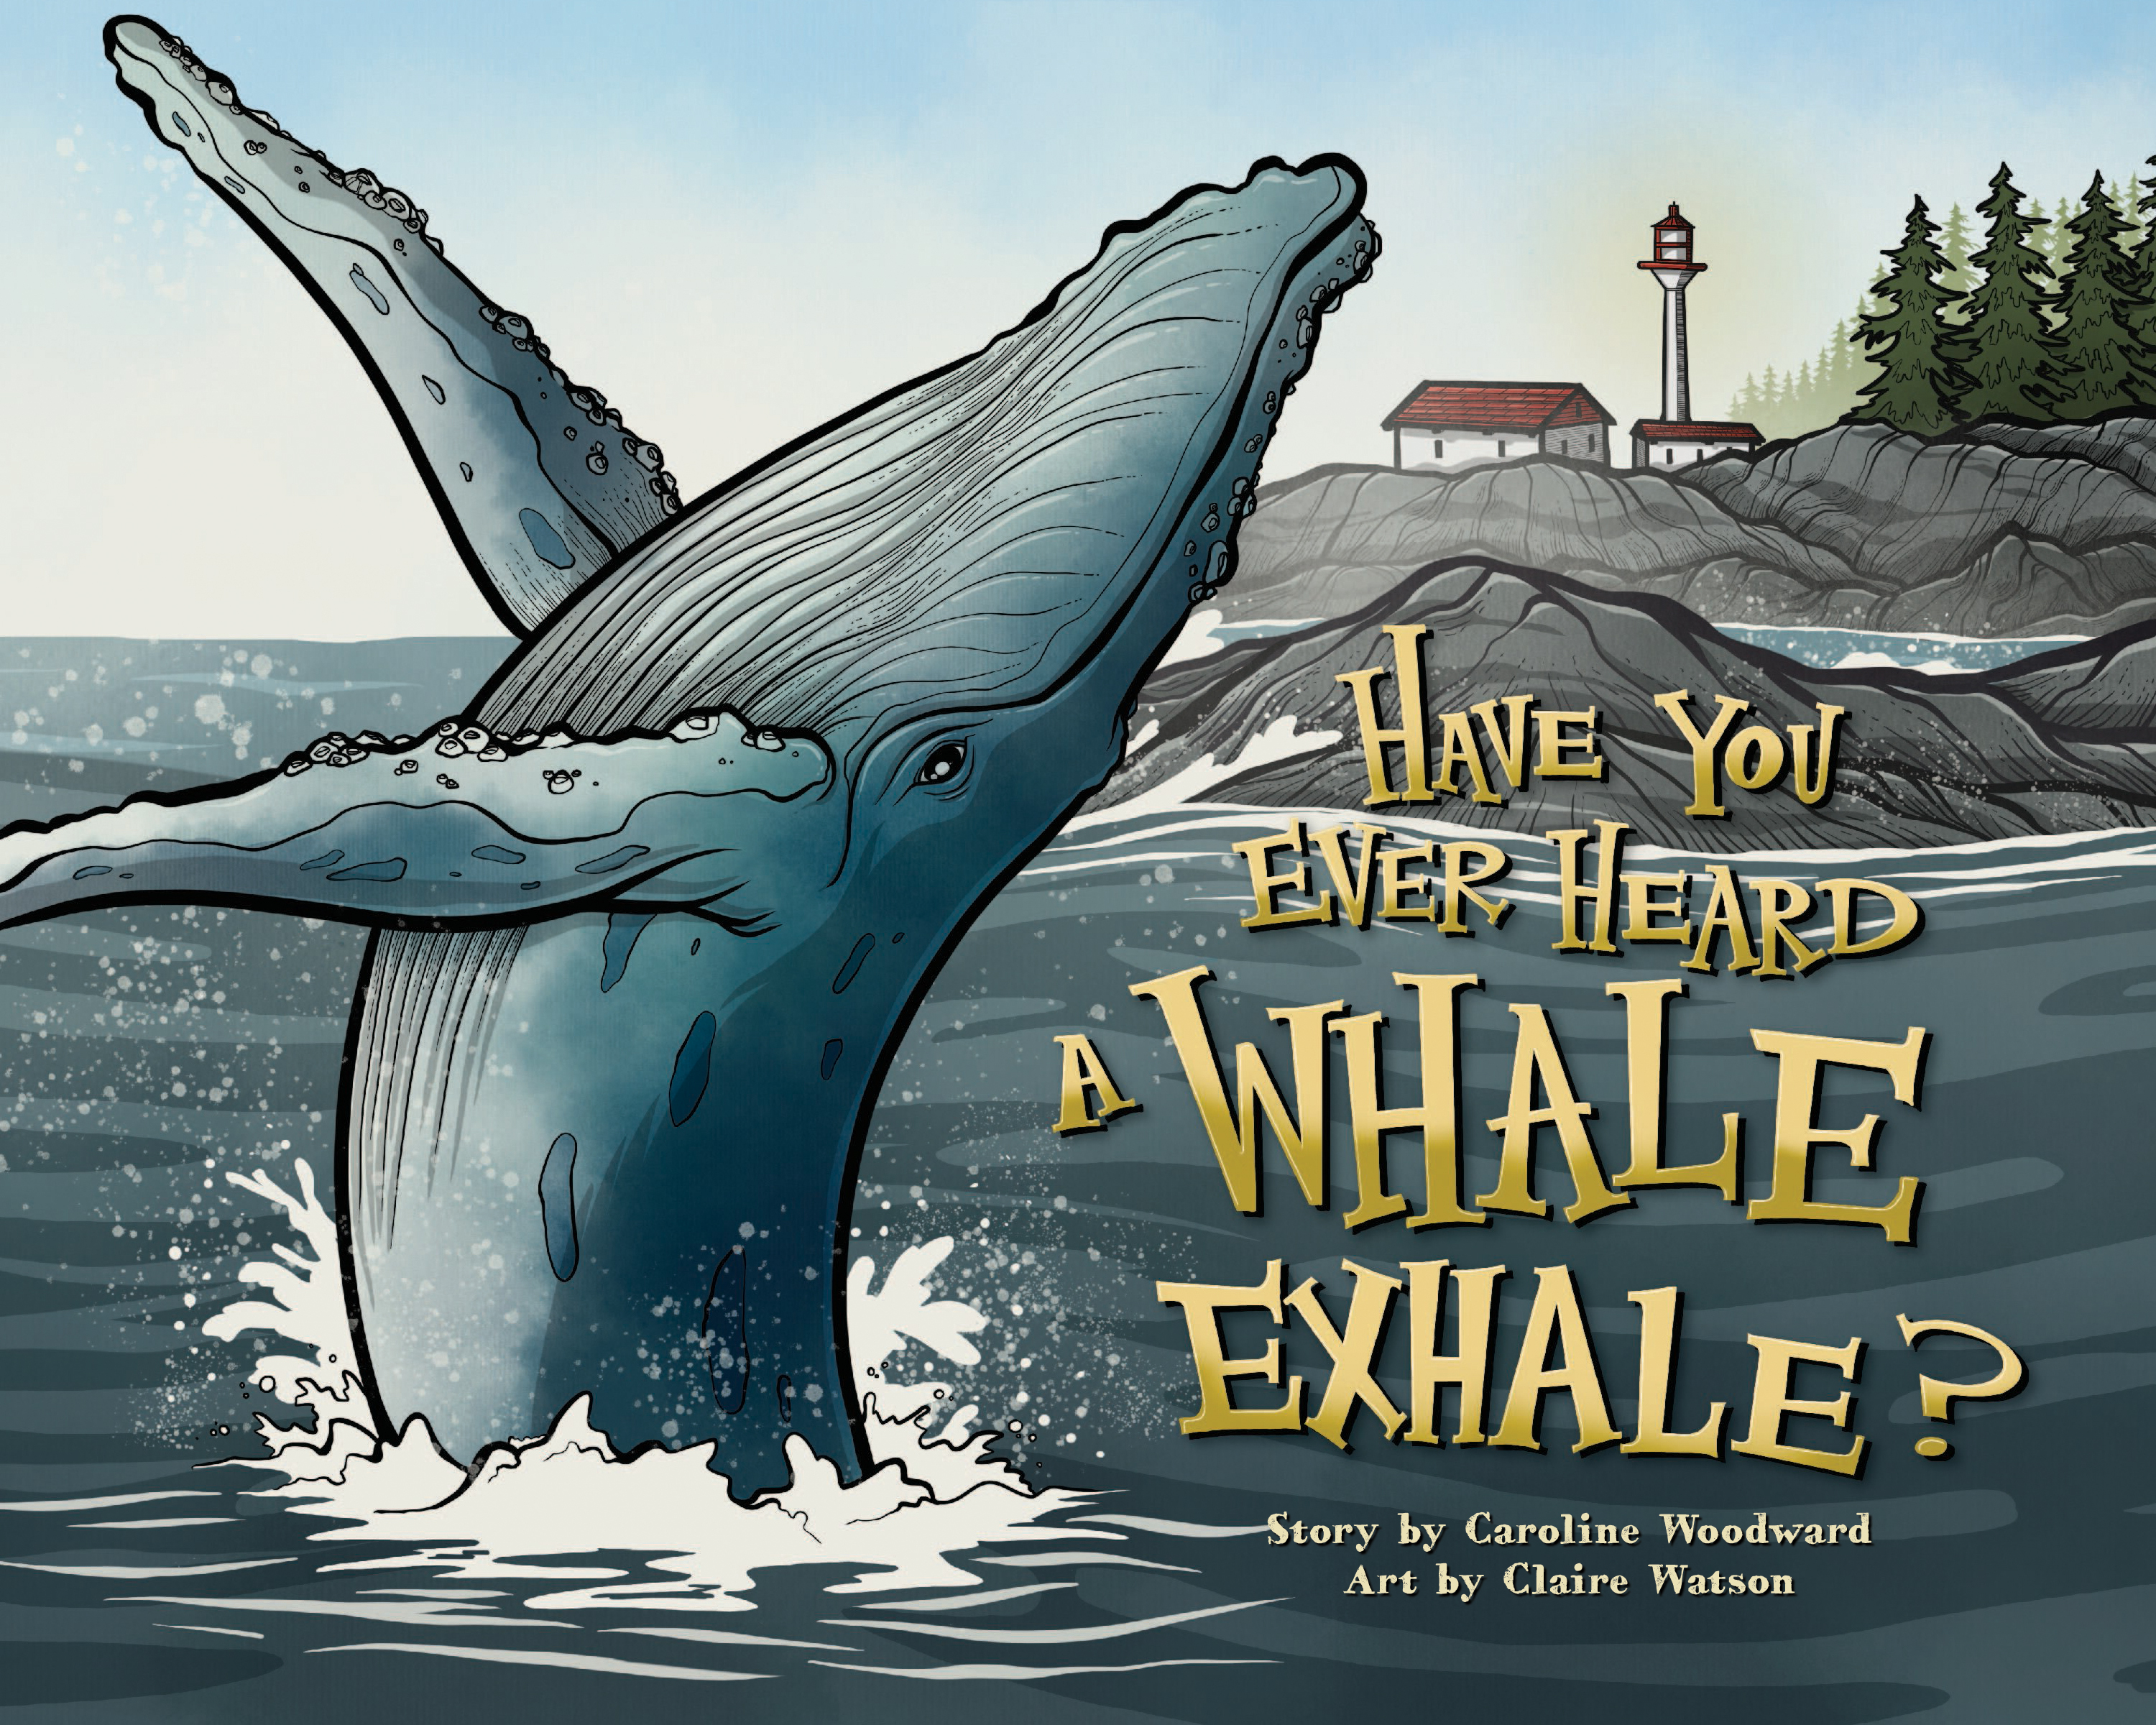 Book cover of "Have You Ever Heard A Whale Exhale?"